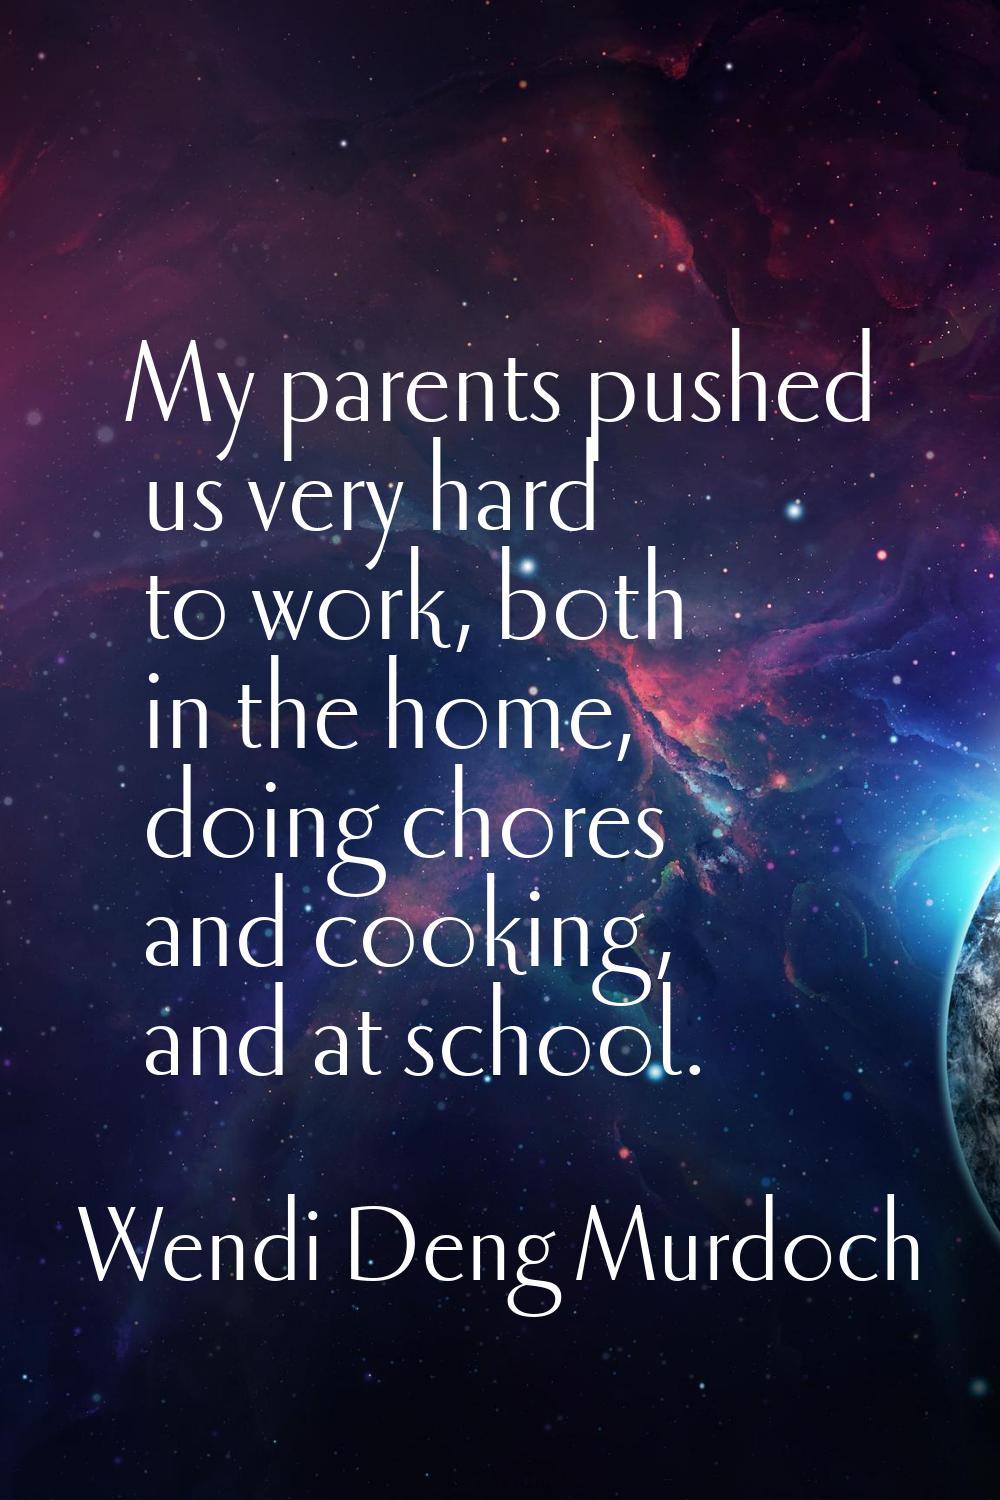 My parents pushed us very hard to work, both in the home, doing chores and cooking, and at school.